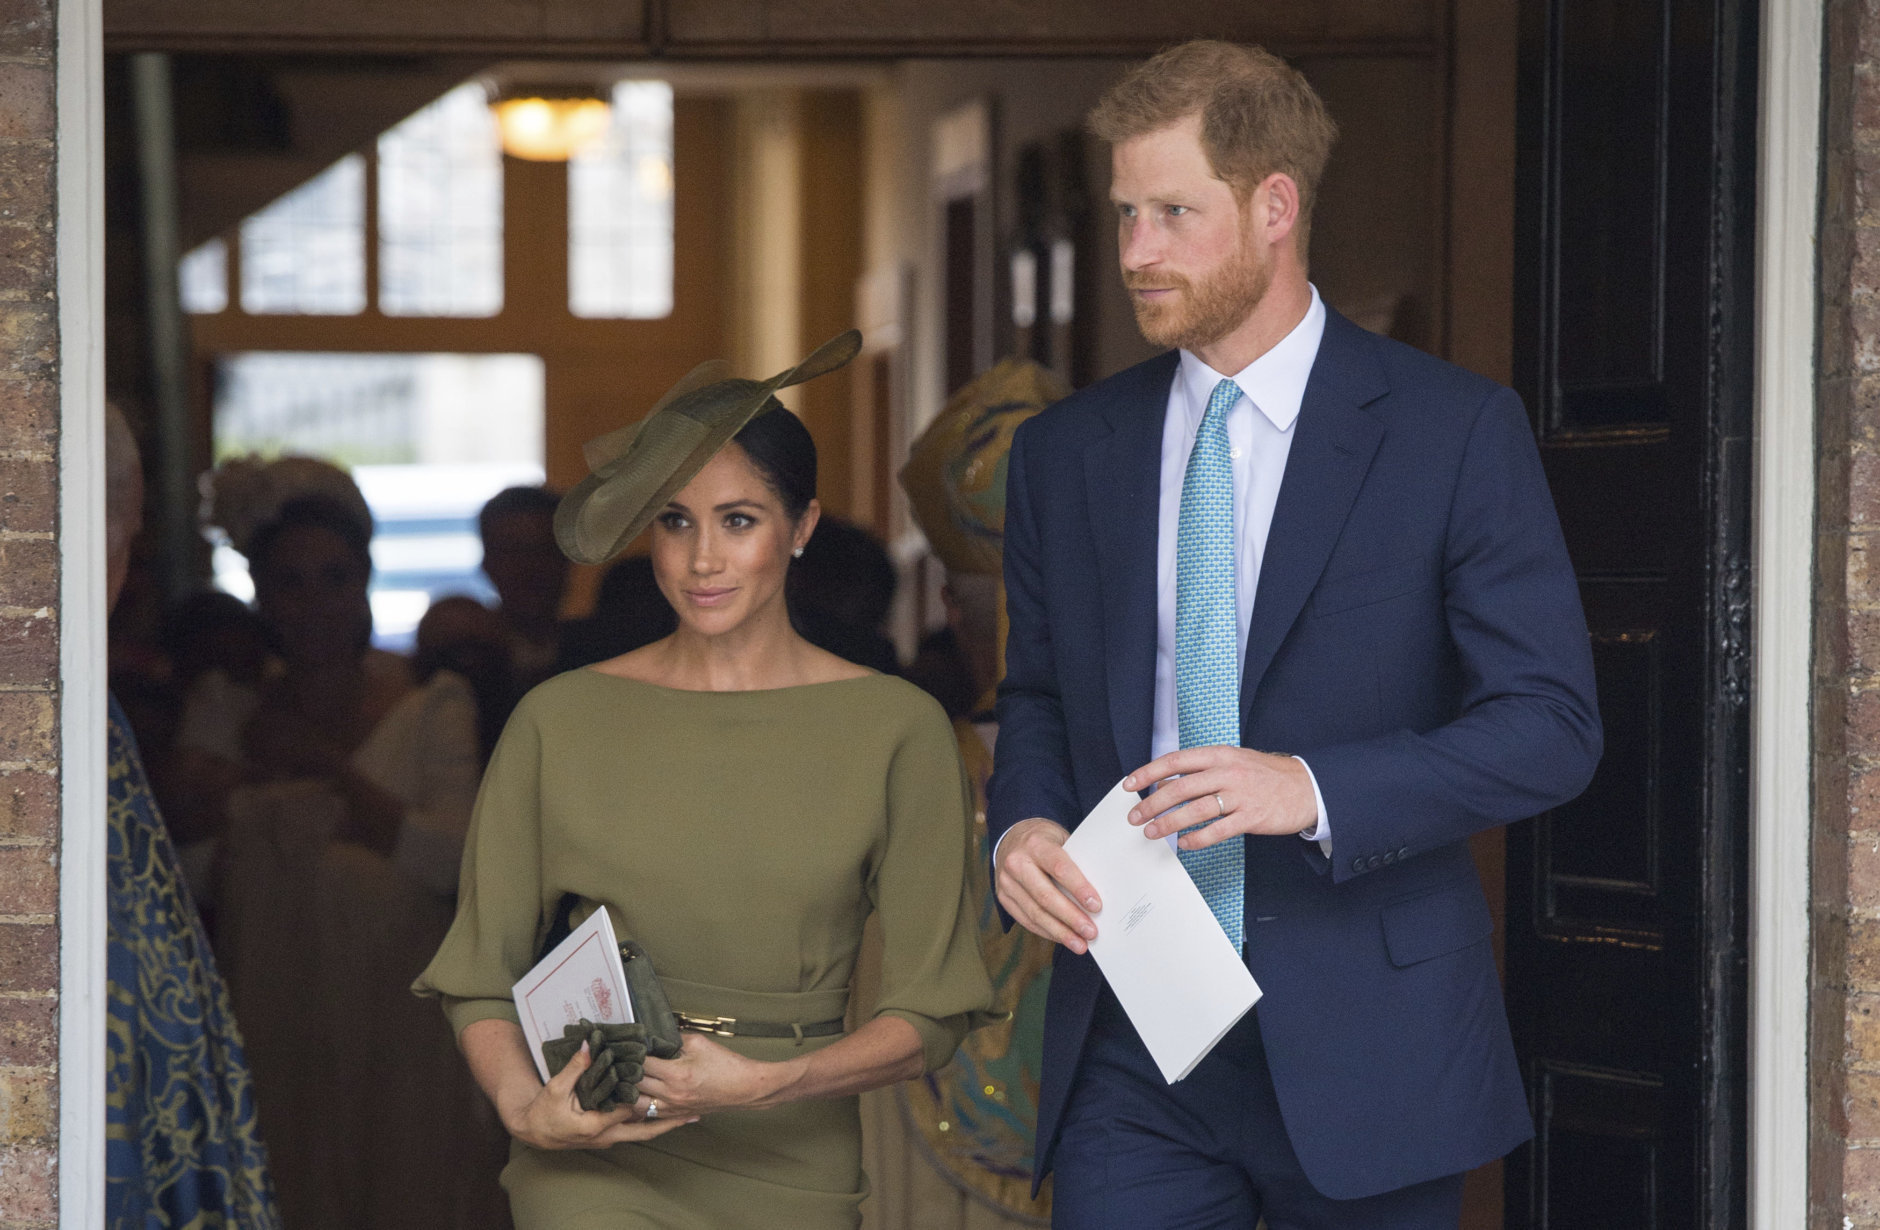 Britain's Prince Harry and Meghan Duchess of Sussex leave after the christening service of Prince Louis at the Chapel Royal, St James's Palace, London, Monday, July 9, 2018. (Dominic Lipinski/Pool Photo via AP)